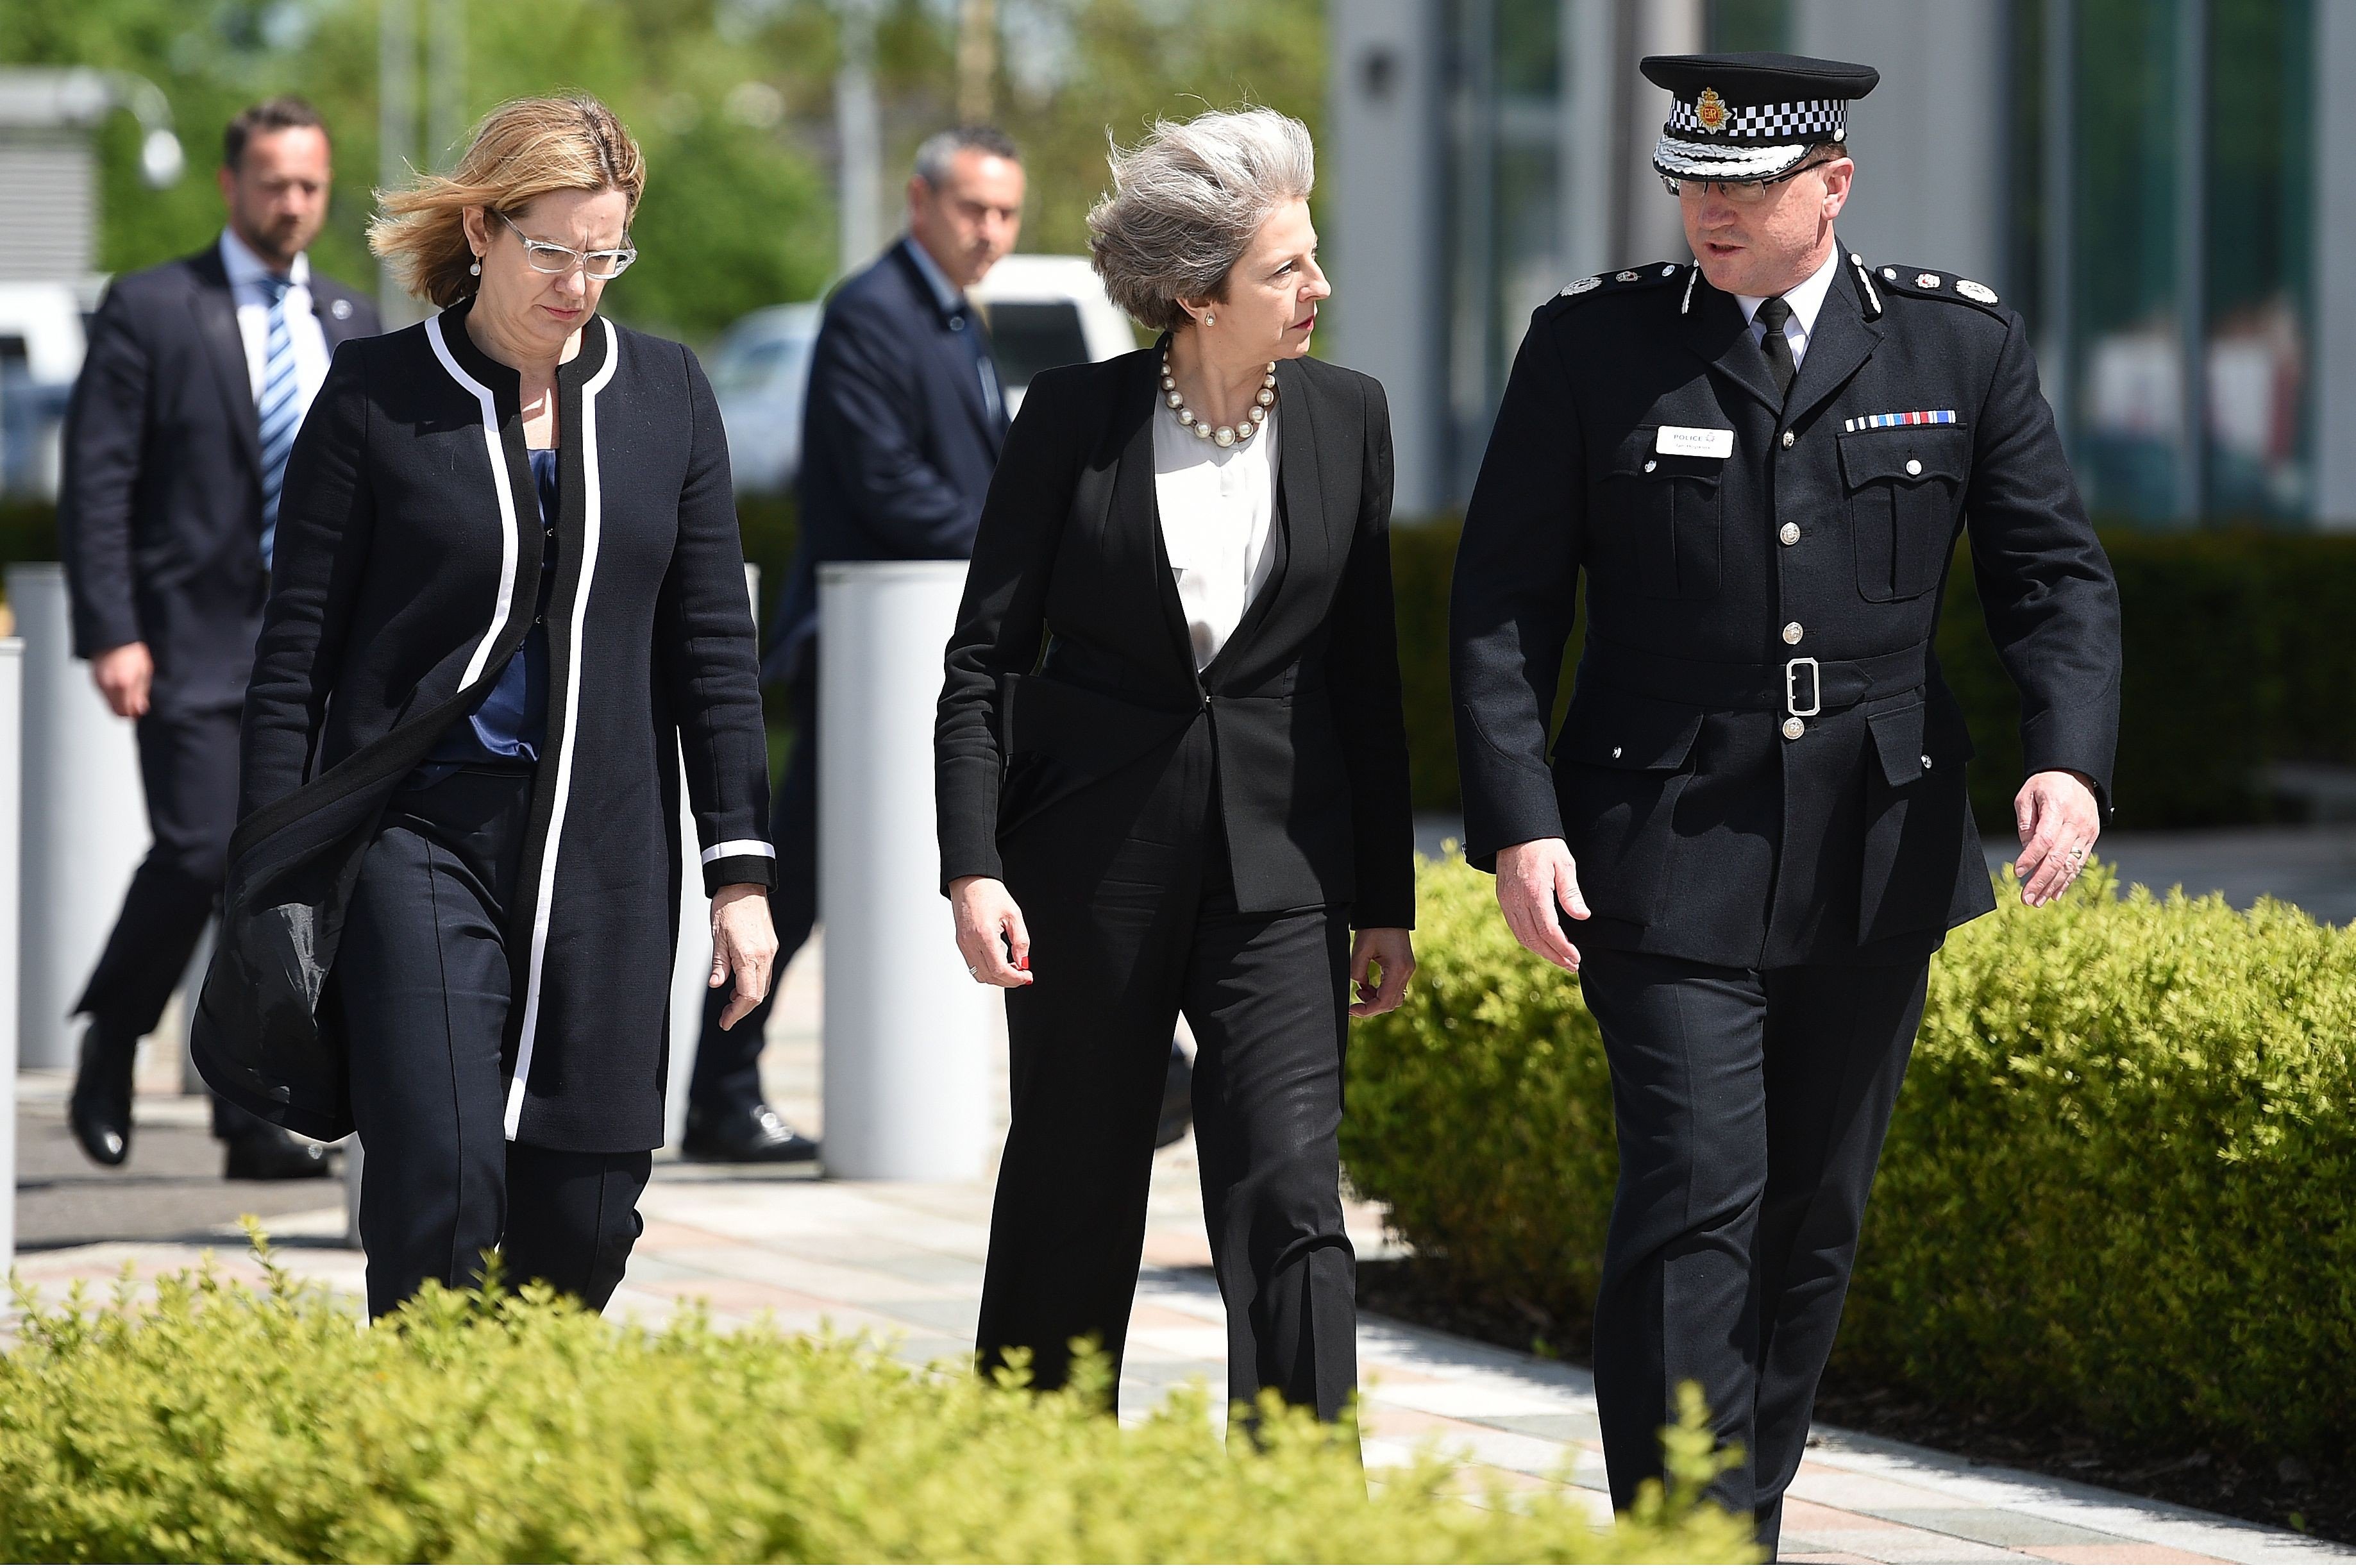 Britain's Prime Minister Theresa May (centre) walks with Chief Constable of Greater Manchester Police, Ian Hopkins (right) and Britain's Home Secretary Amber Rudd , as May arrives at the force's headquarters in Manchester last Tuesday, a day after the deadly terror attack at the Manchester Arena. Photo: AFP